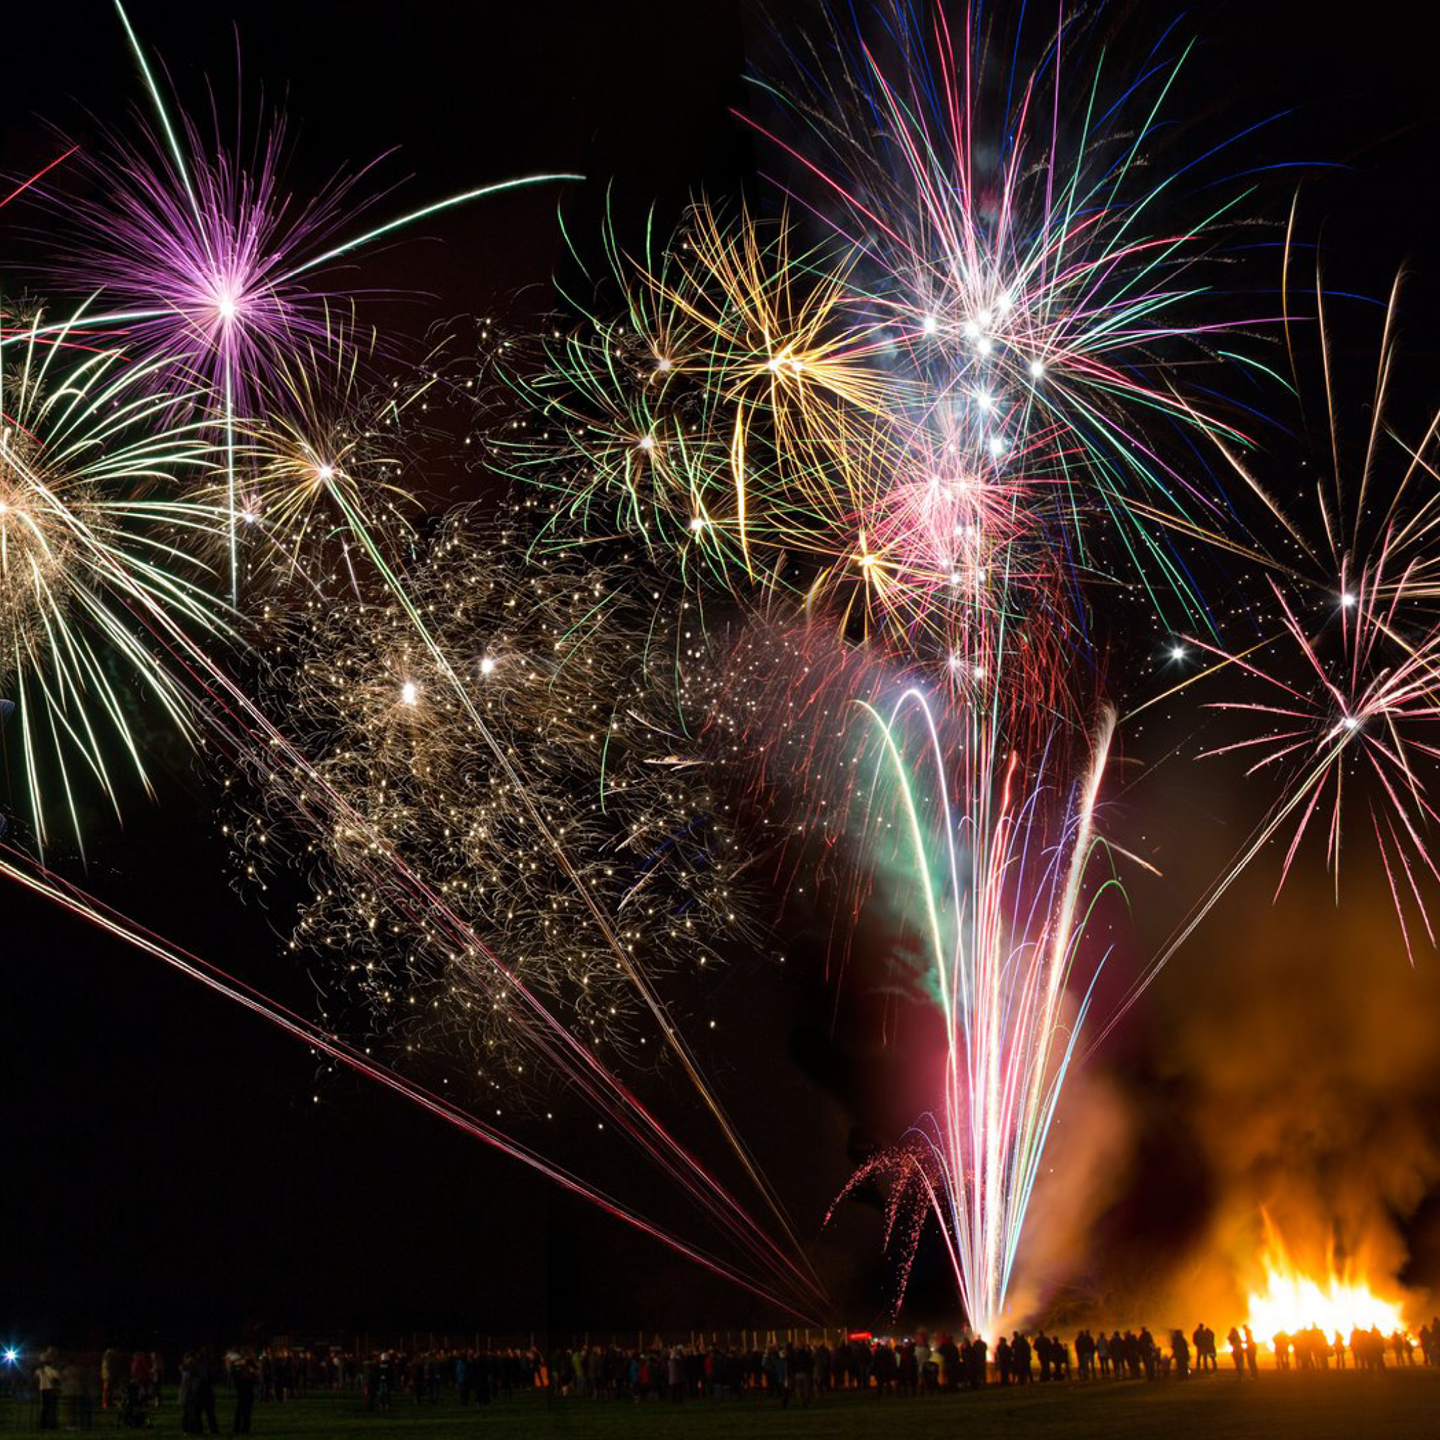 A 5th November fireworks display in England 